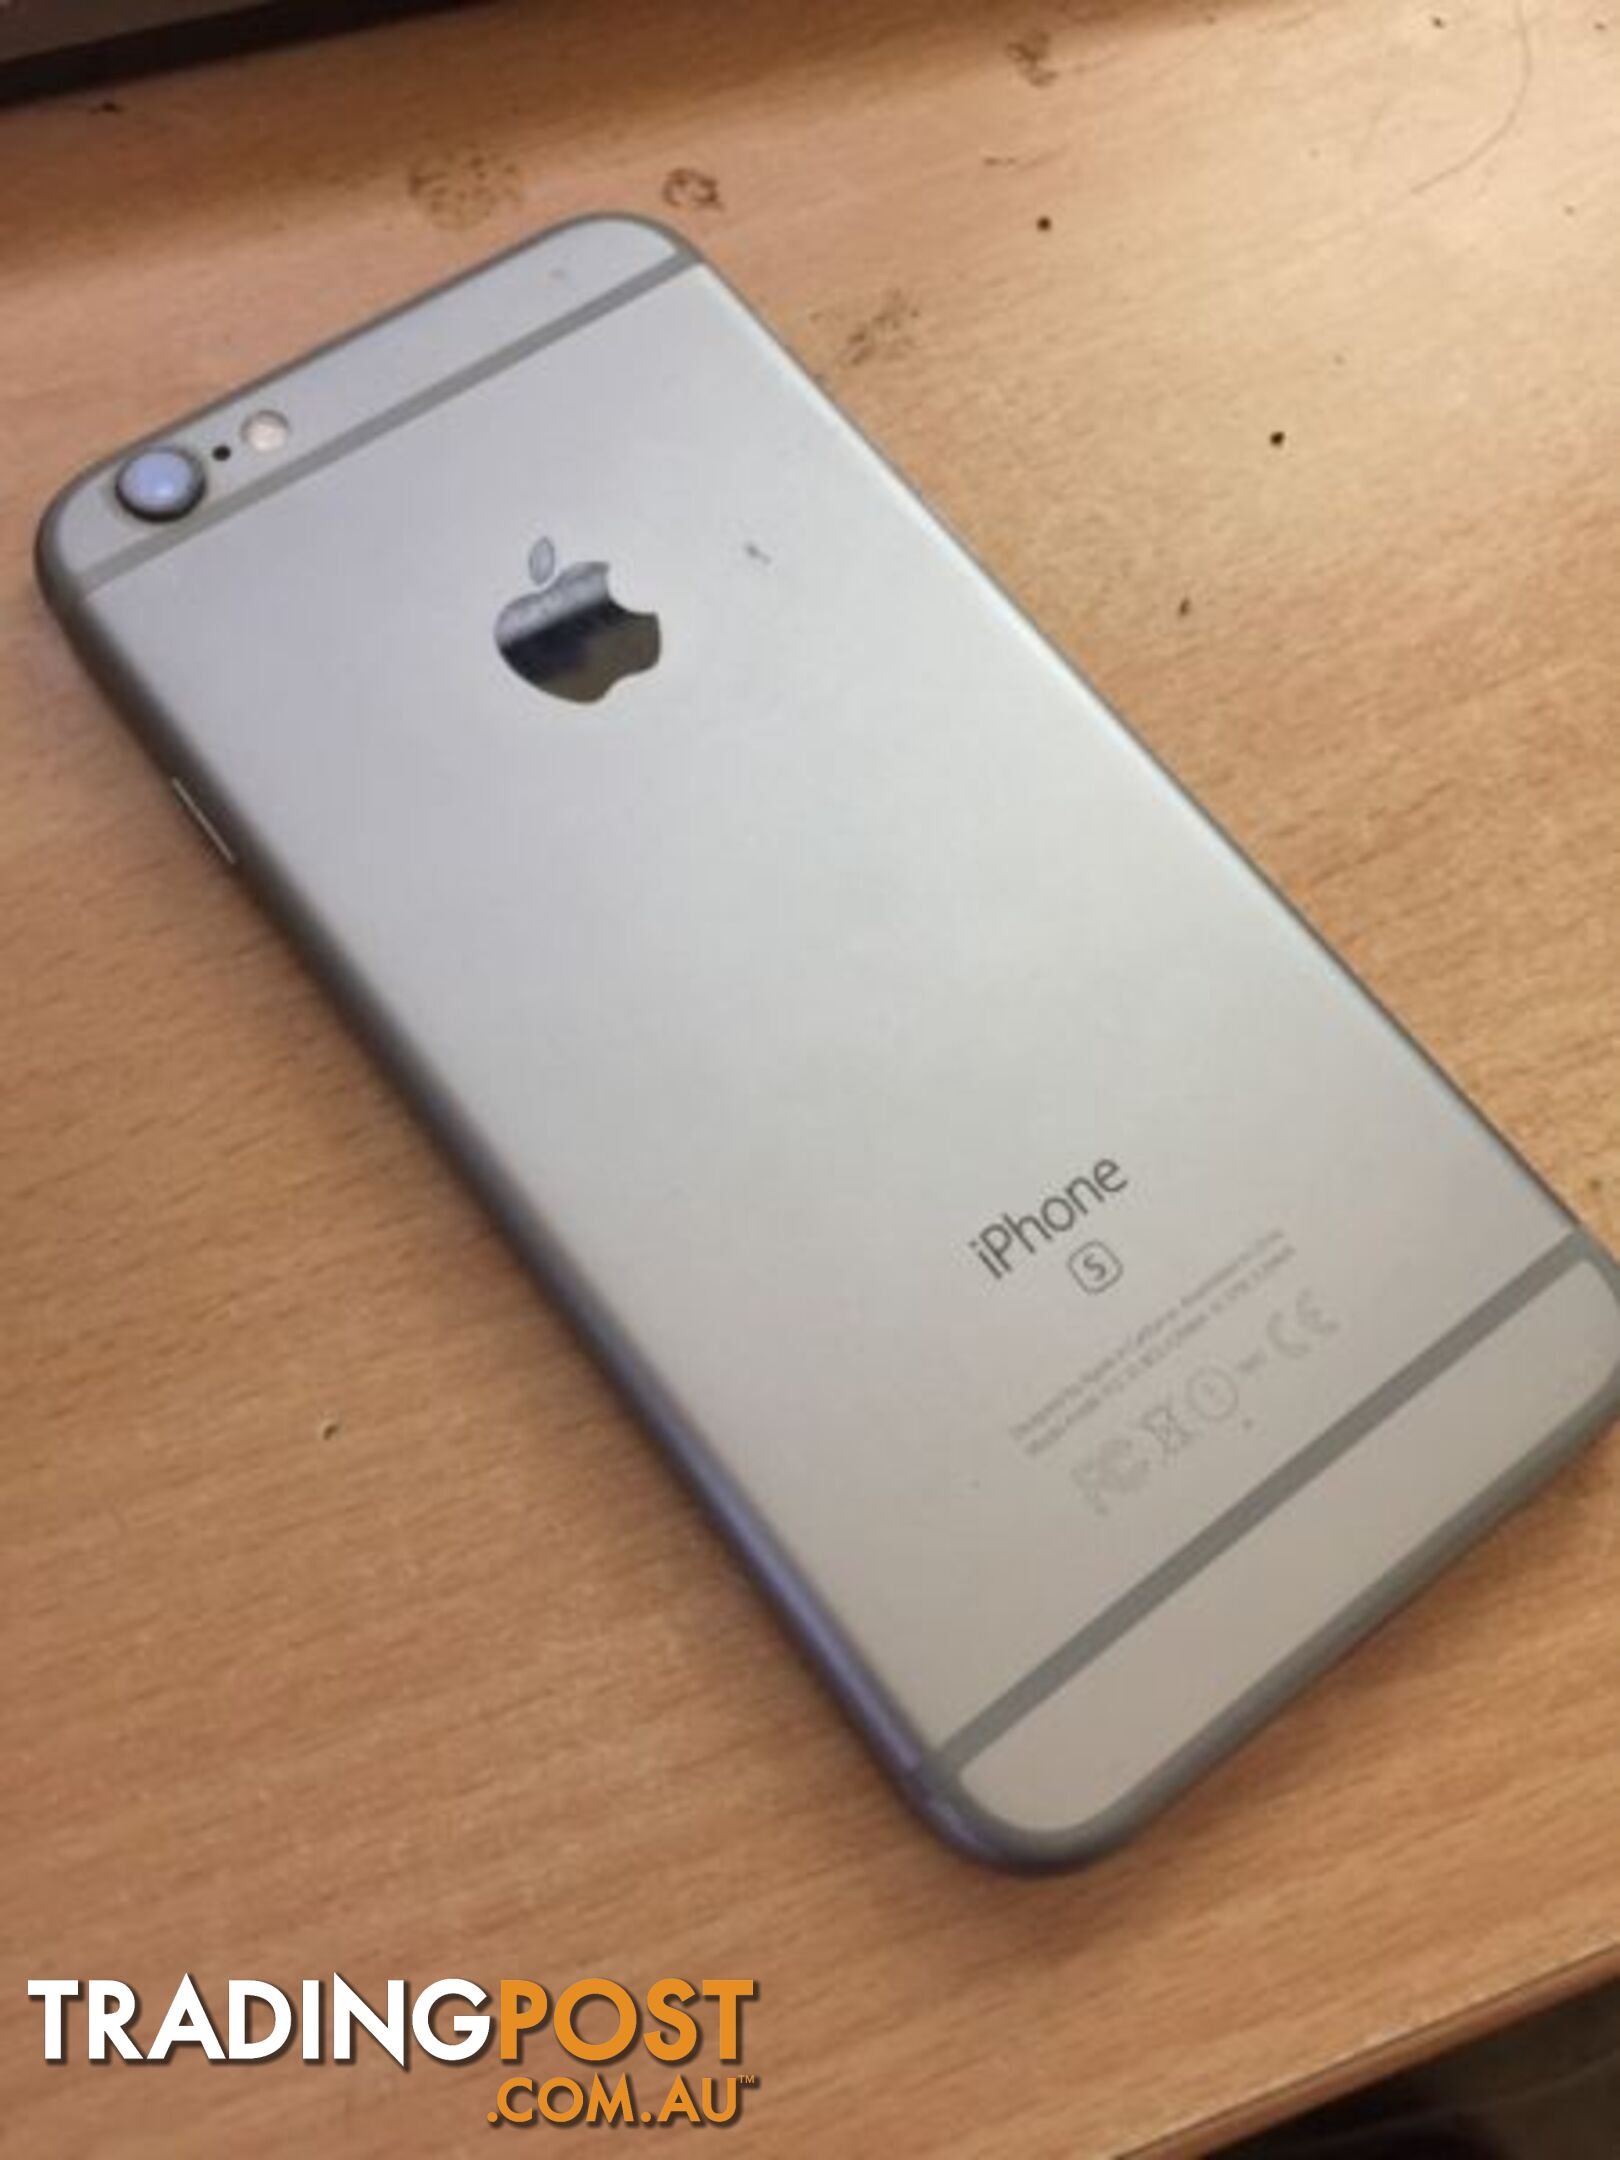 Apple iPhone 6s - as new - purchased for parts